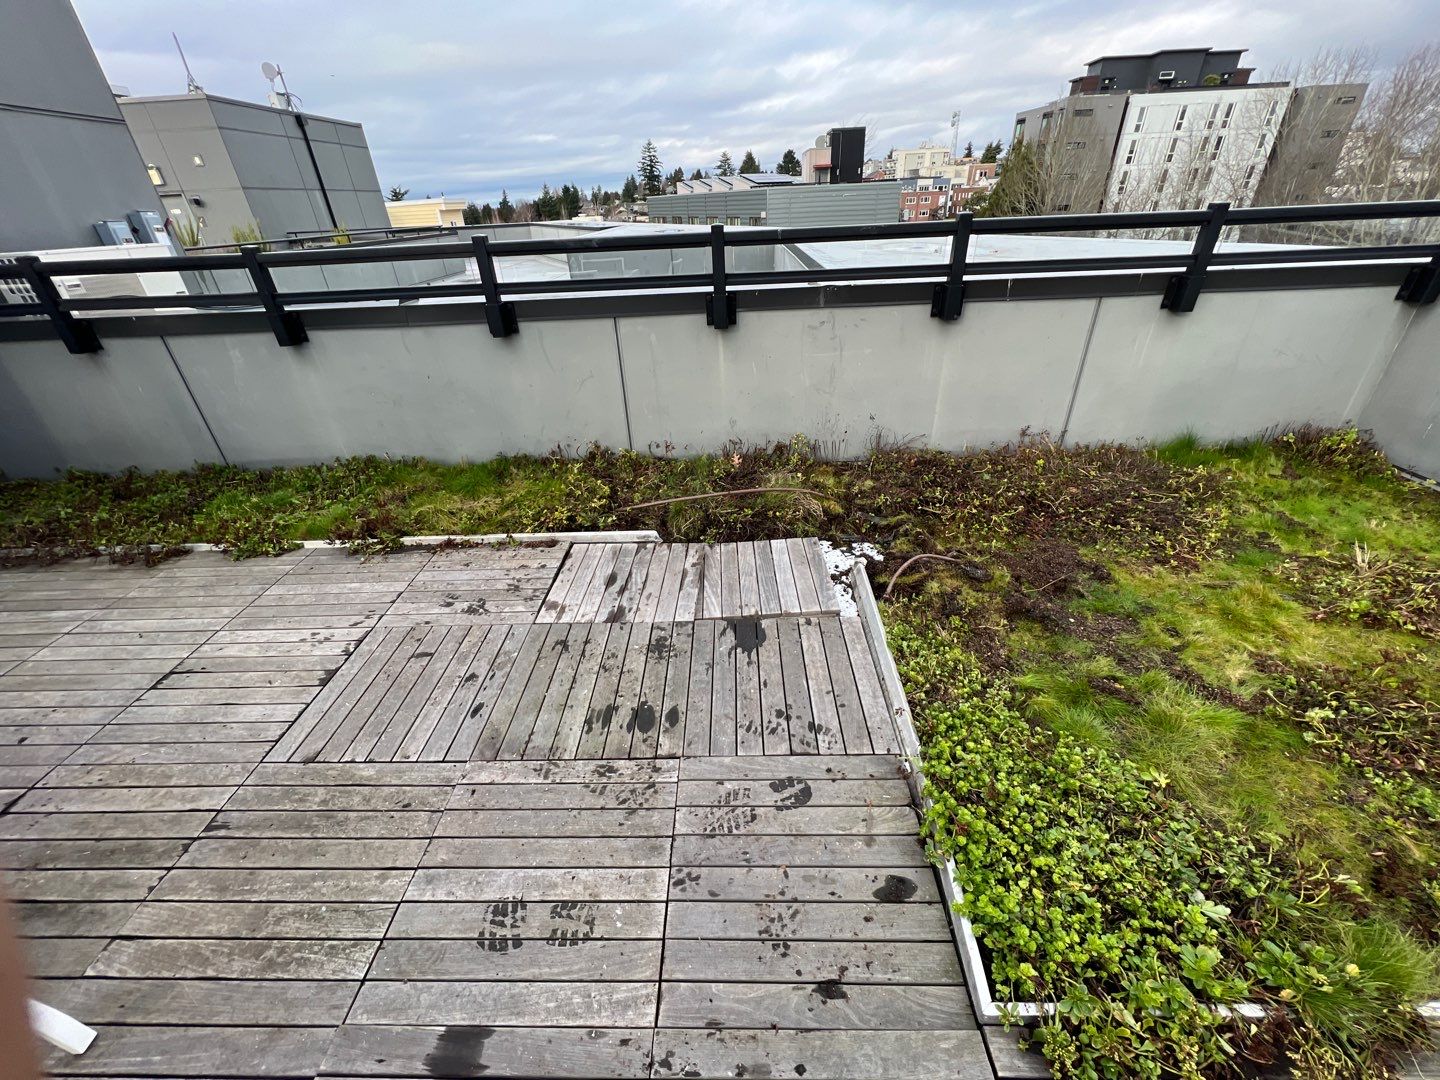 Picture of a successful leak repair, showing a professional patch job with seamless integration into the roof surface. The repair ensures protection from future water damage and enhances the overall appearance of the building